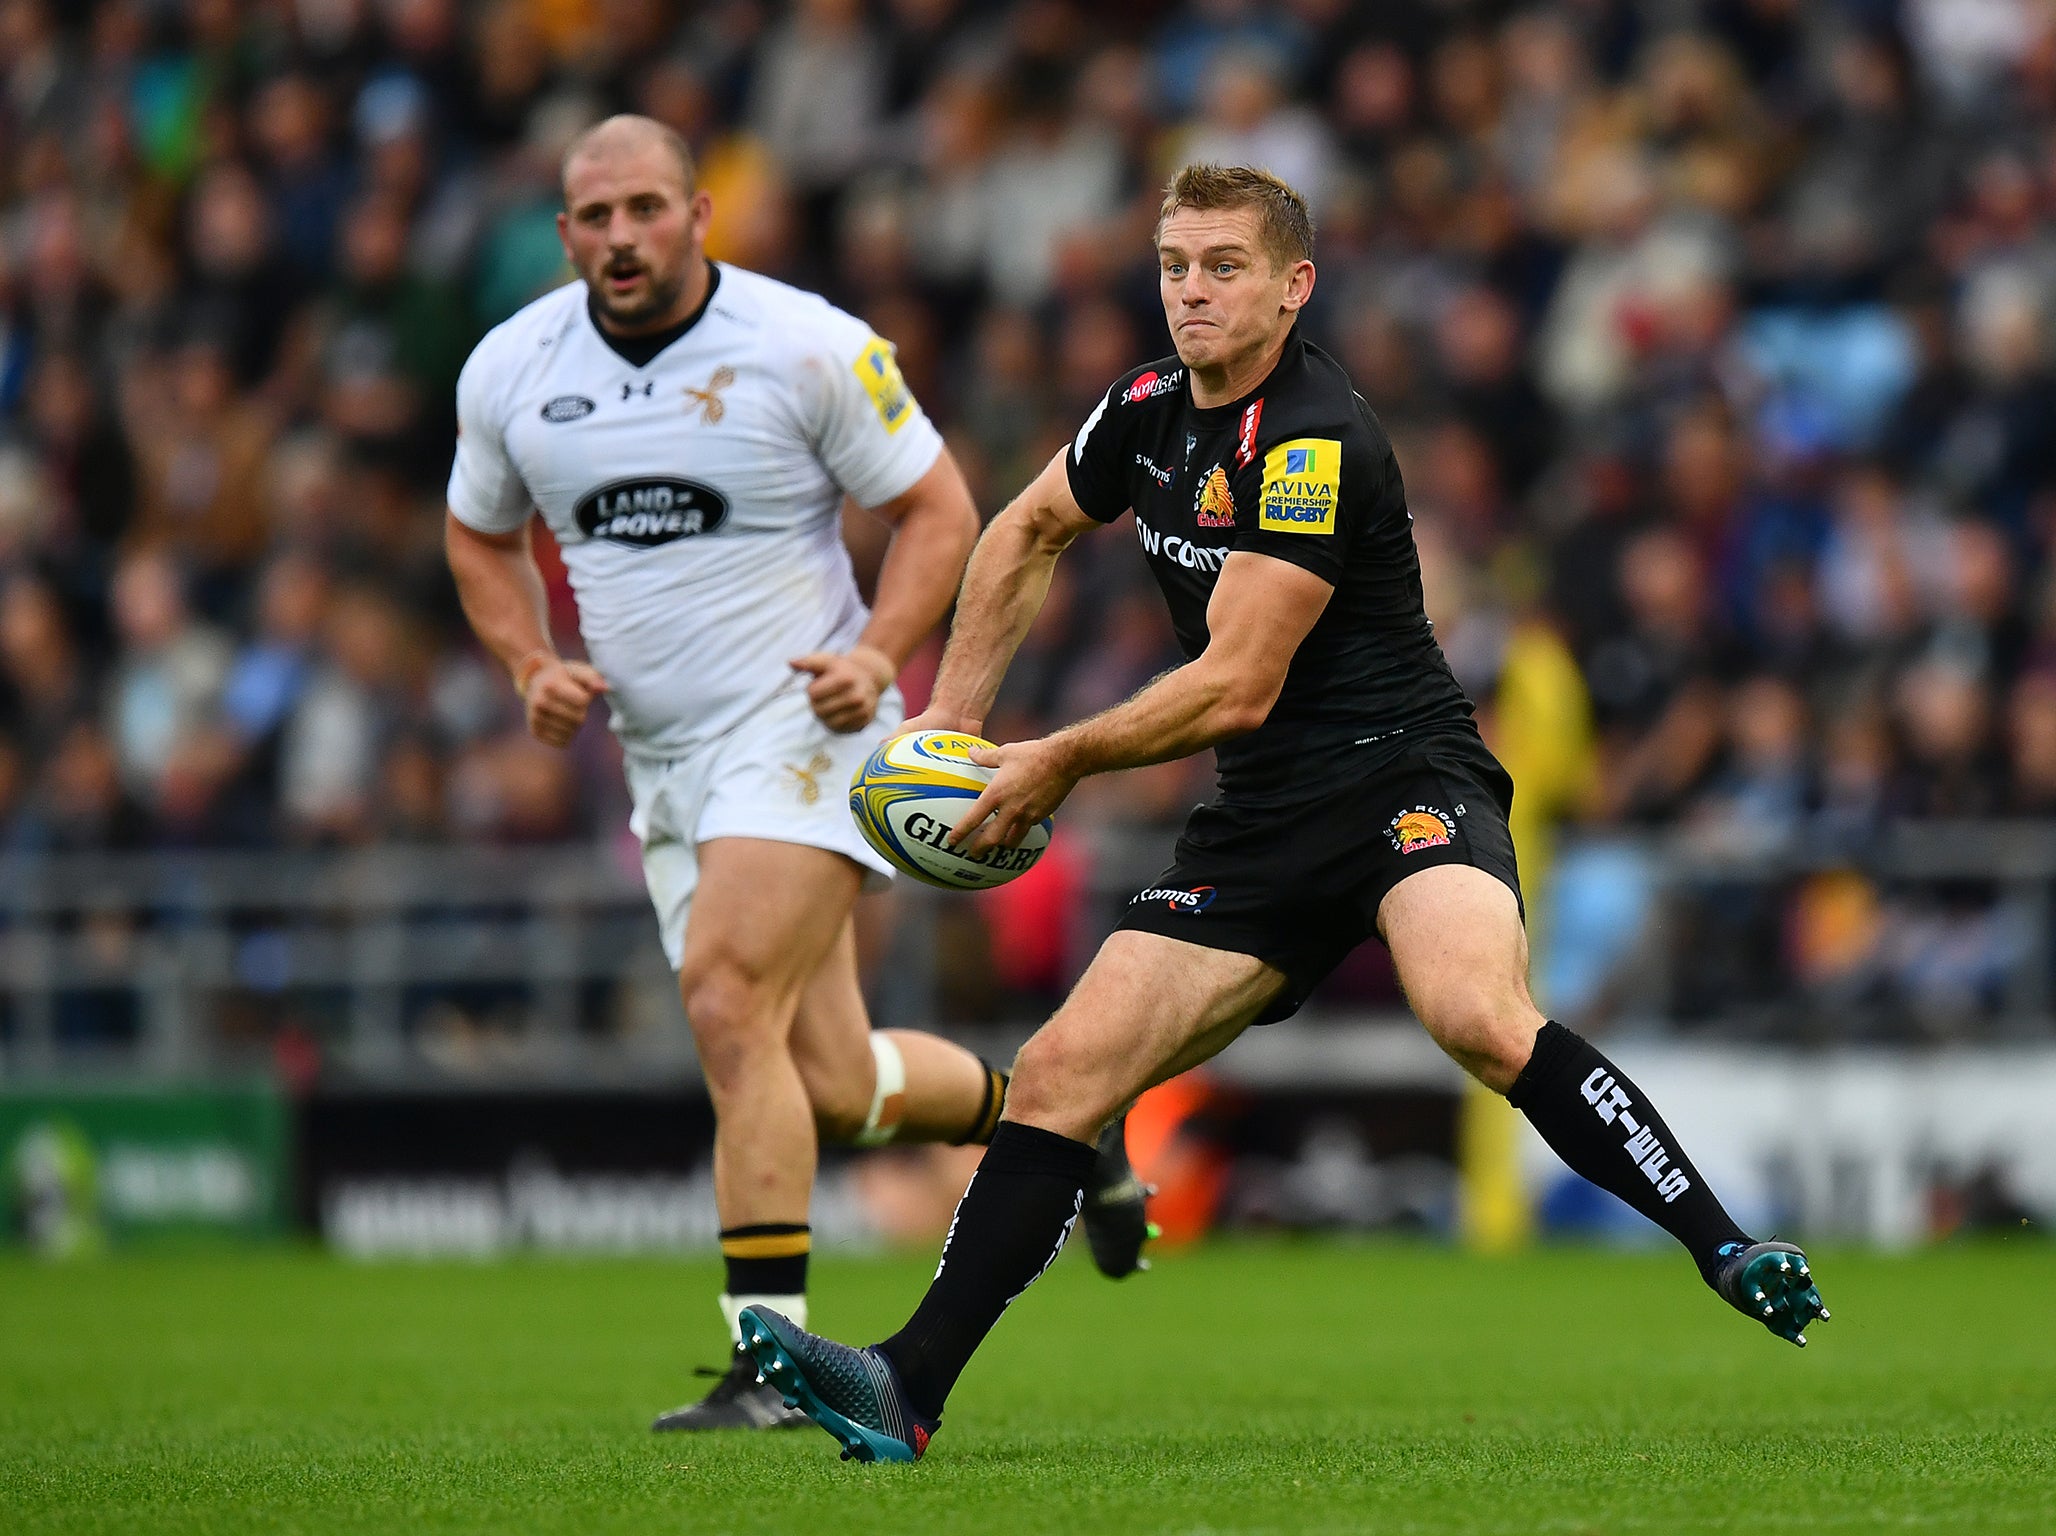 Gareth Steenson of Exeter Chiefs looks for a pass